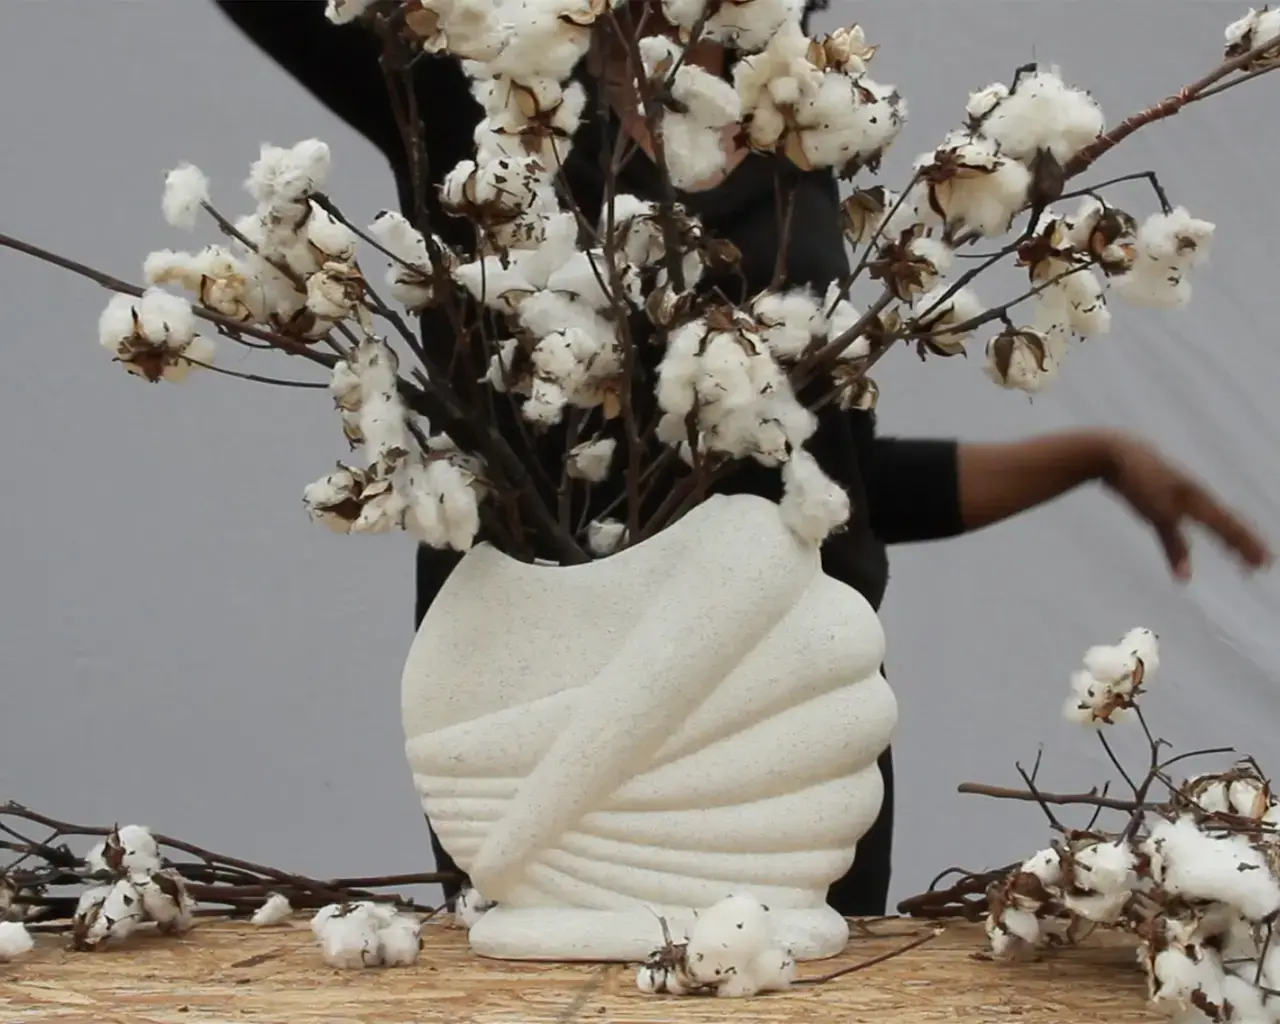 Cauleen Smith, still from Cotton&nbsp;Ikebana,&nbsp;2020,&nbsp;HD digital video,&nbsp;6:43 minutes, edition of five and two artist’s proofs. Image courtesy of the artist and Corbett vs. Dempsey.